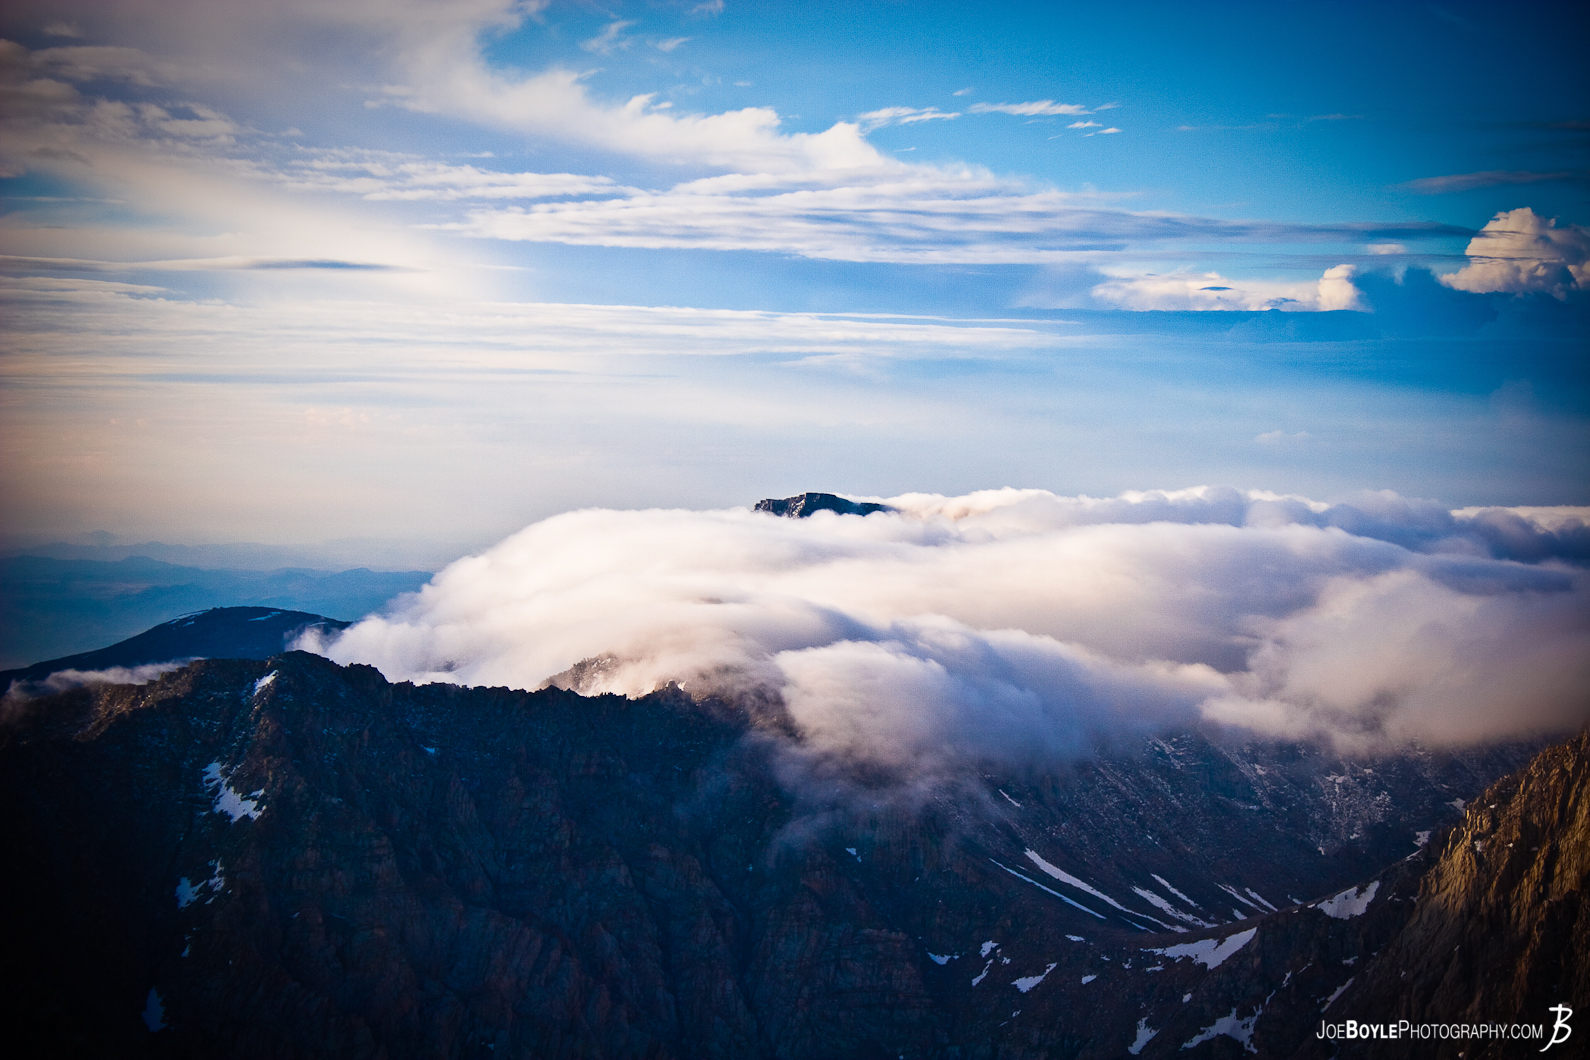  This photo is from the summit of Mt. Whitney located in the Sierra Nevada mountain range. While at the top I was fortunate enough to see these these clouds "sinking" past a mountain peak. 